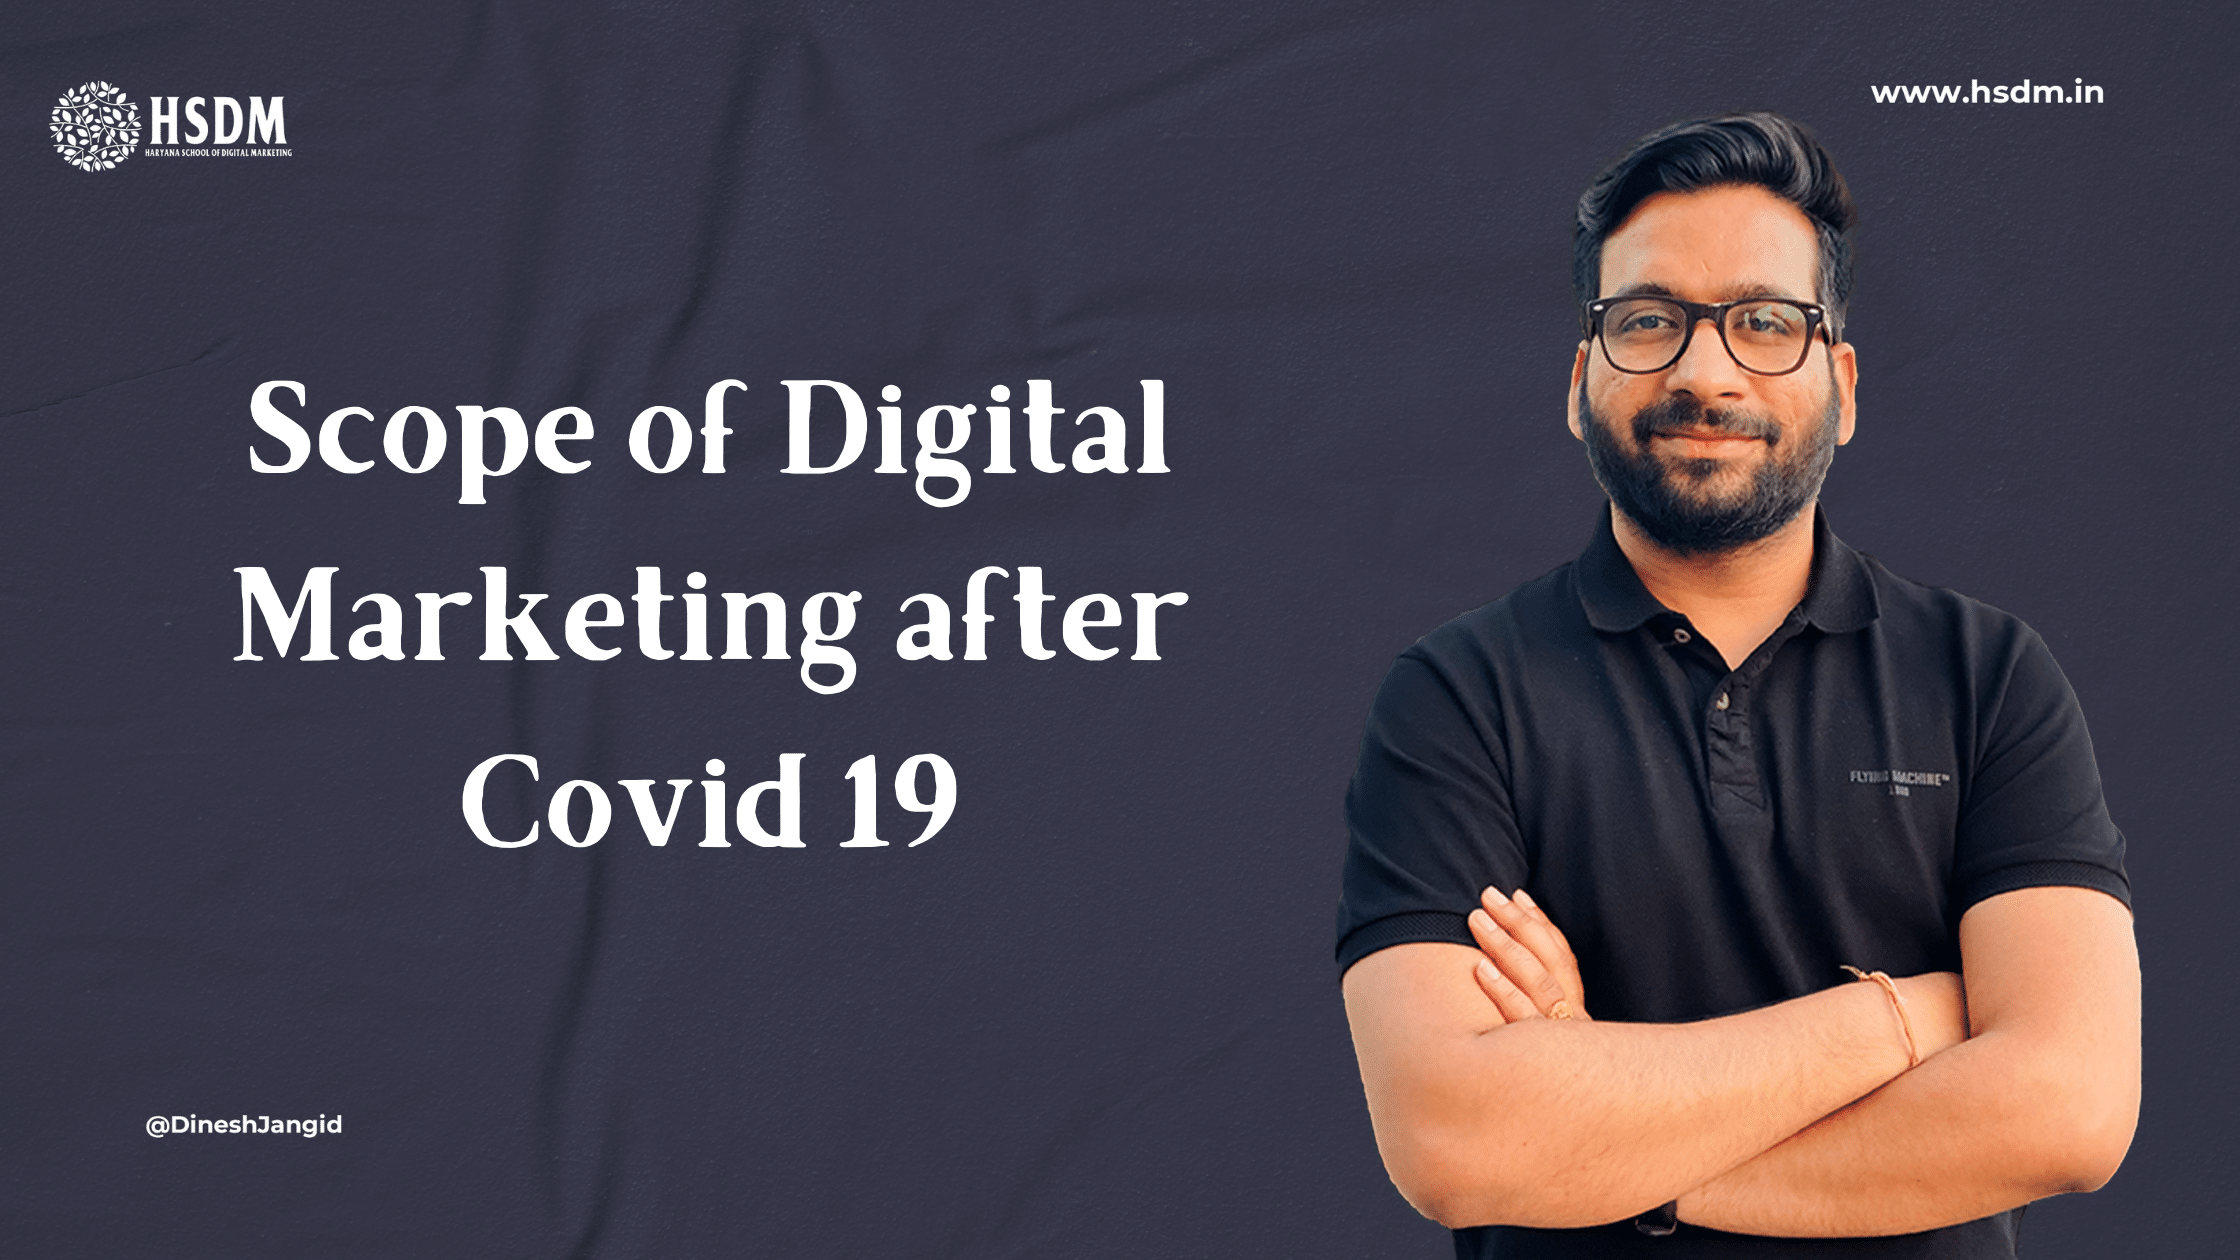 Scope of Digital Marketing after Covid 19